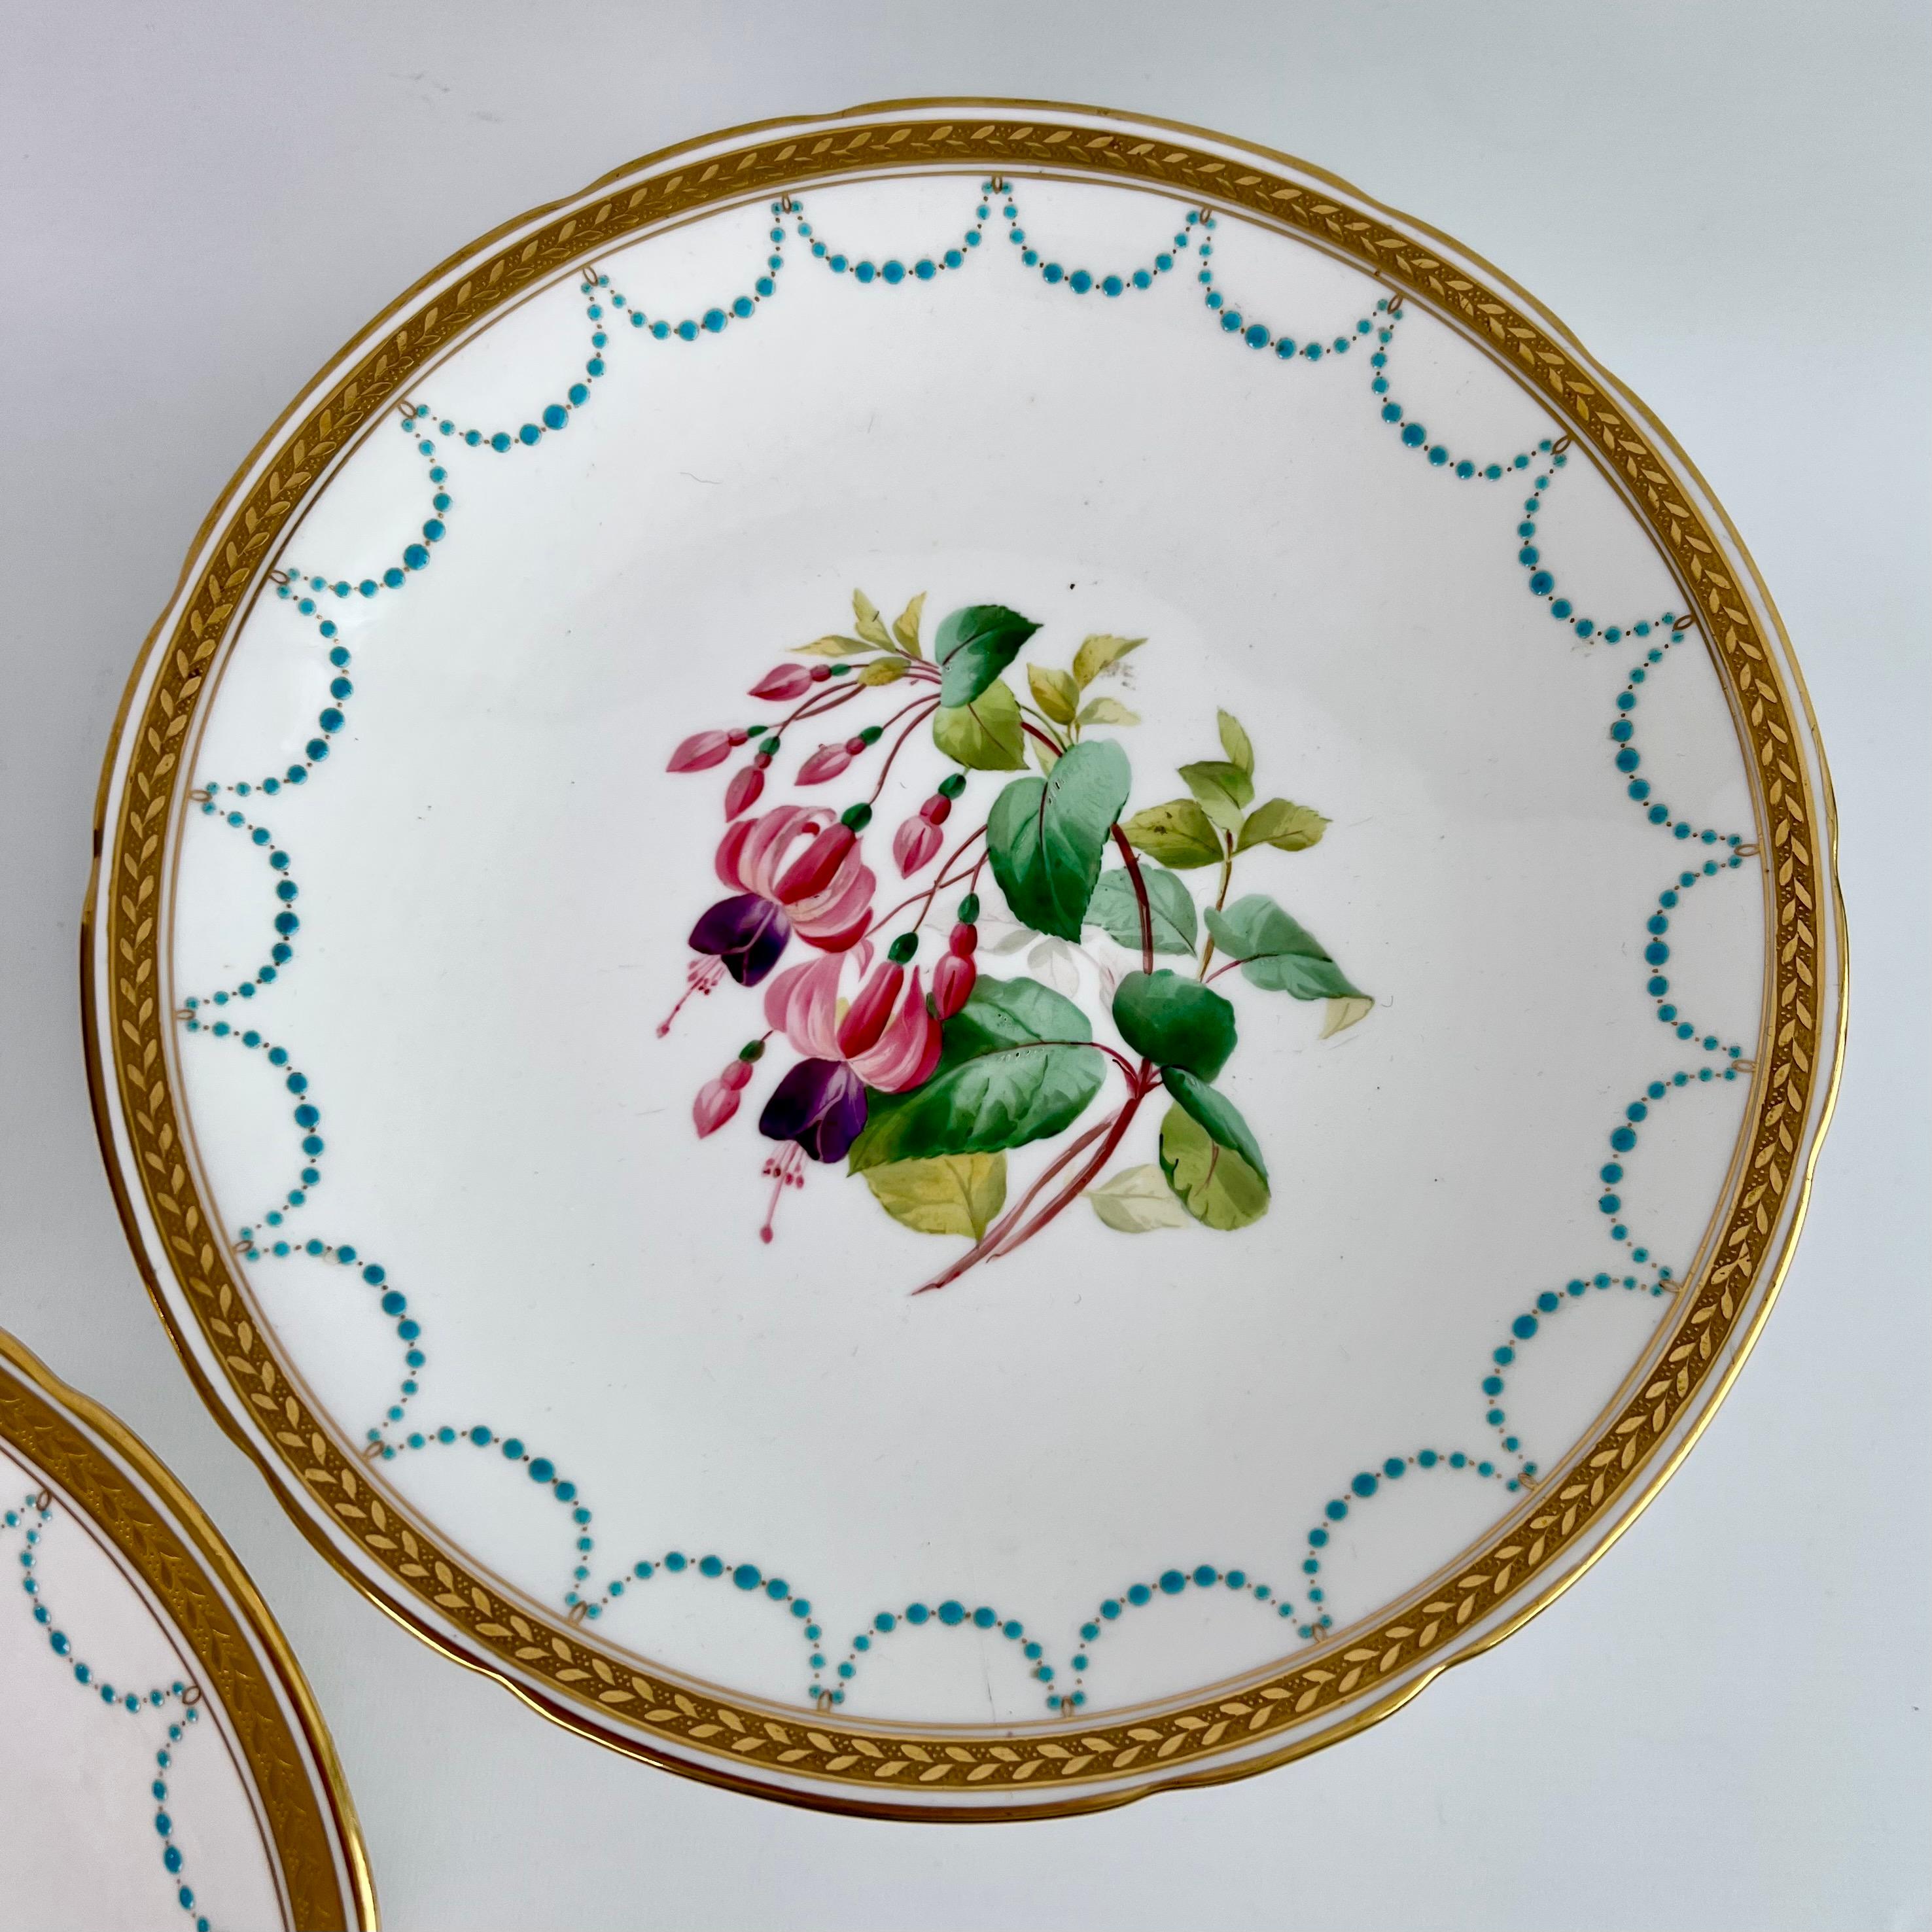 Minton Porcelain Dessert Service, Turquoise and Gilt, Flowers and Fruits, 1870 4